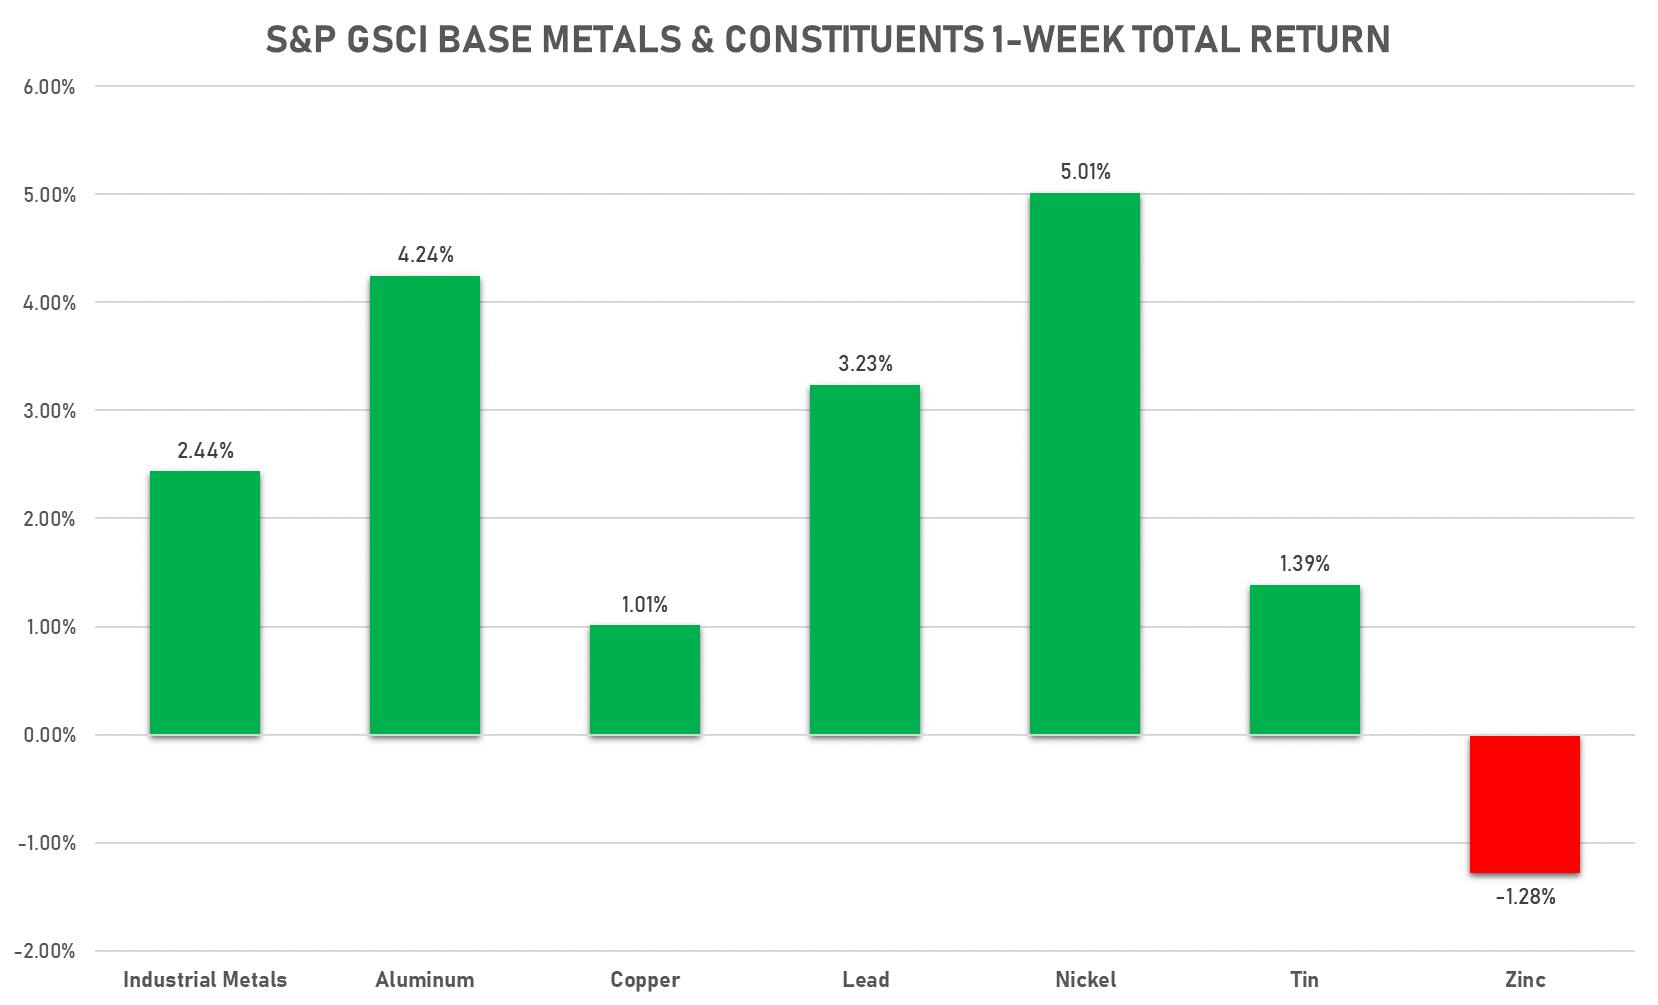 GSCI Base Metals Weekly 2/18/22 | Sources: phipost.com, FactSet data